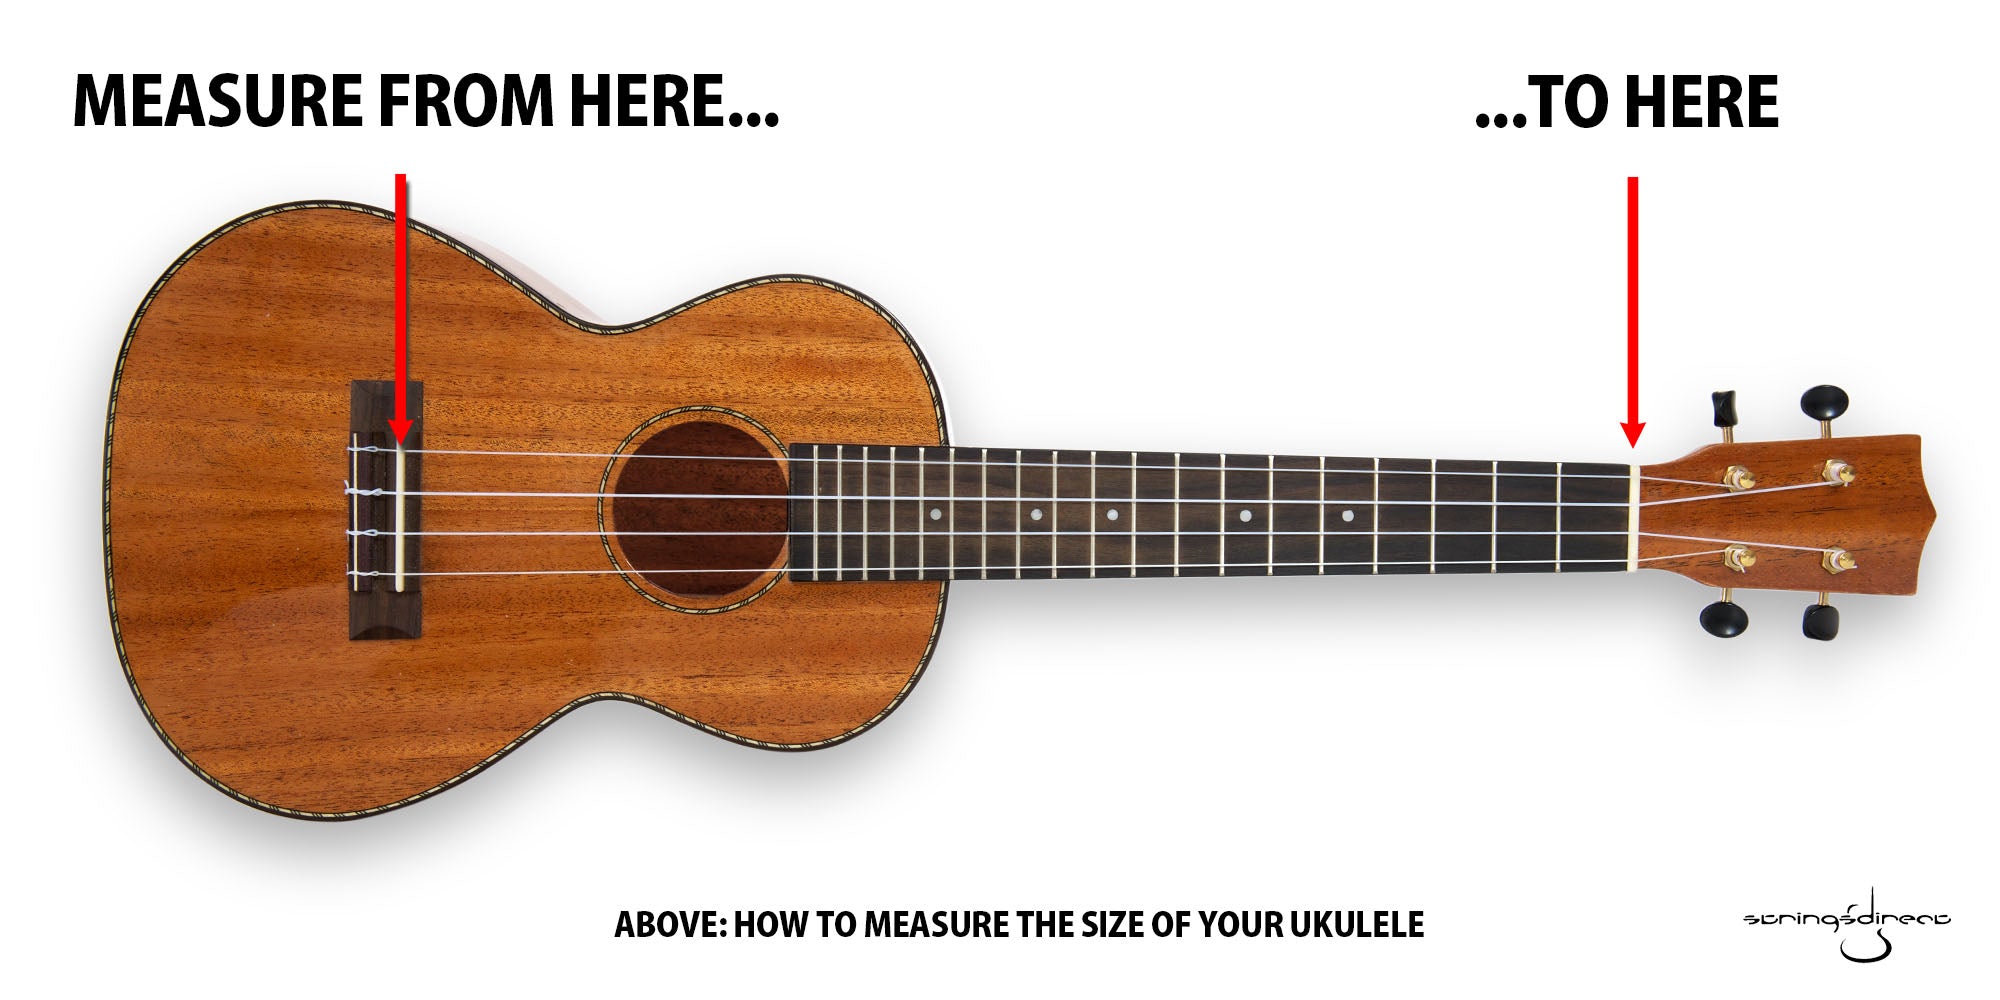 Ukulele Scale Length Guide - Where to measure to and from